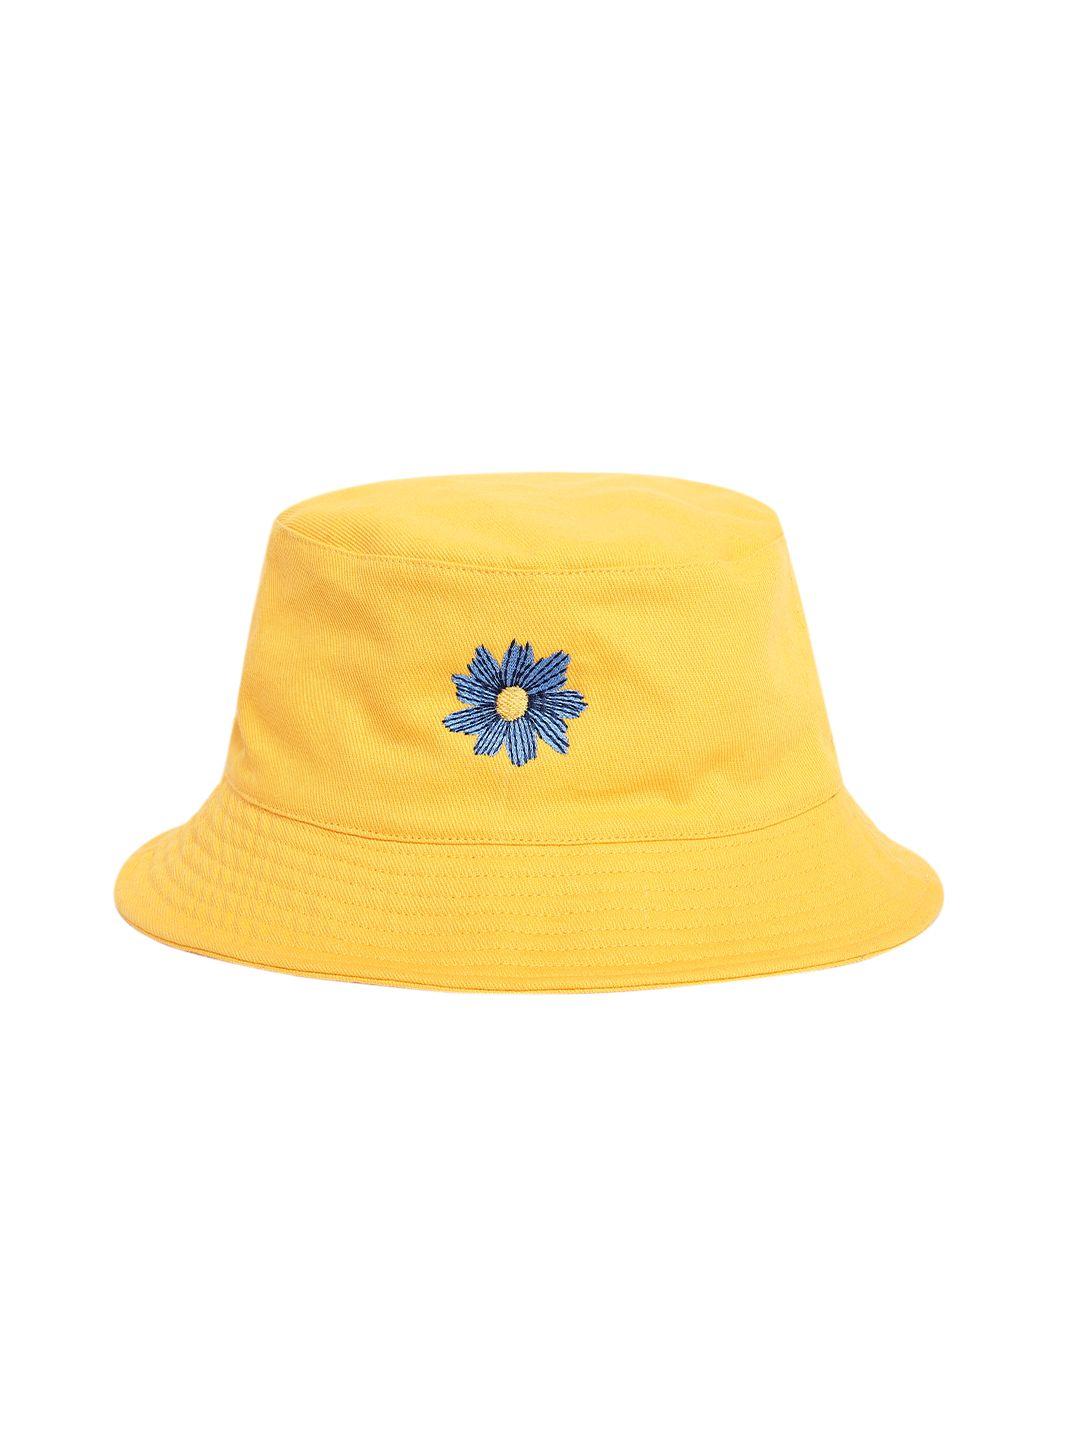 blueberry unisex yellow & blue floral embroidered reversible bucket hat